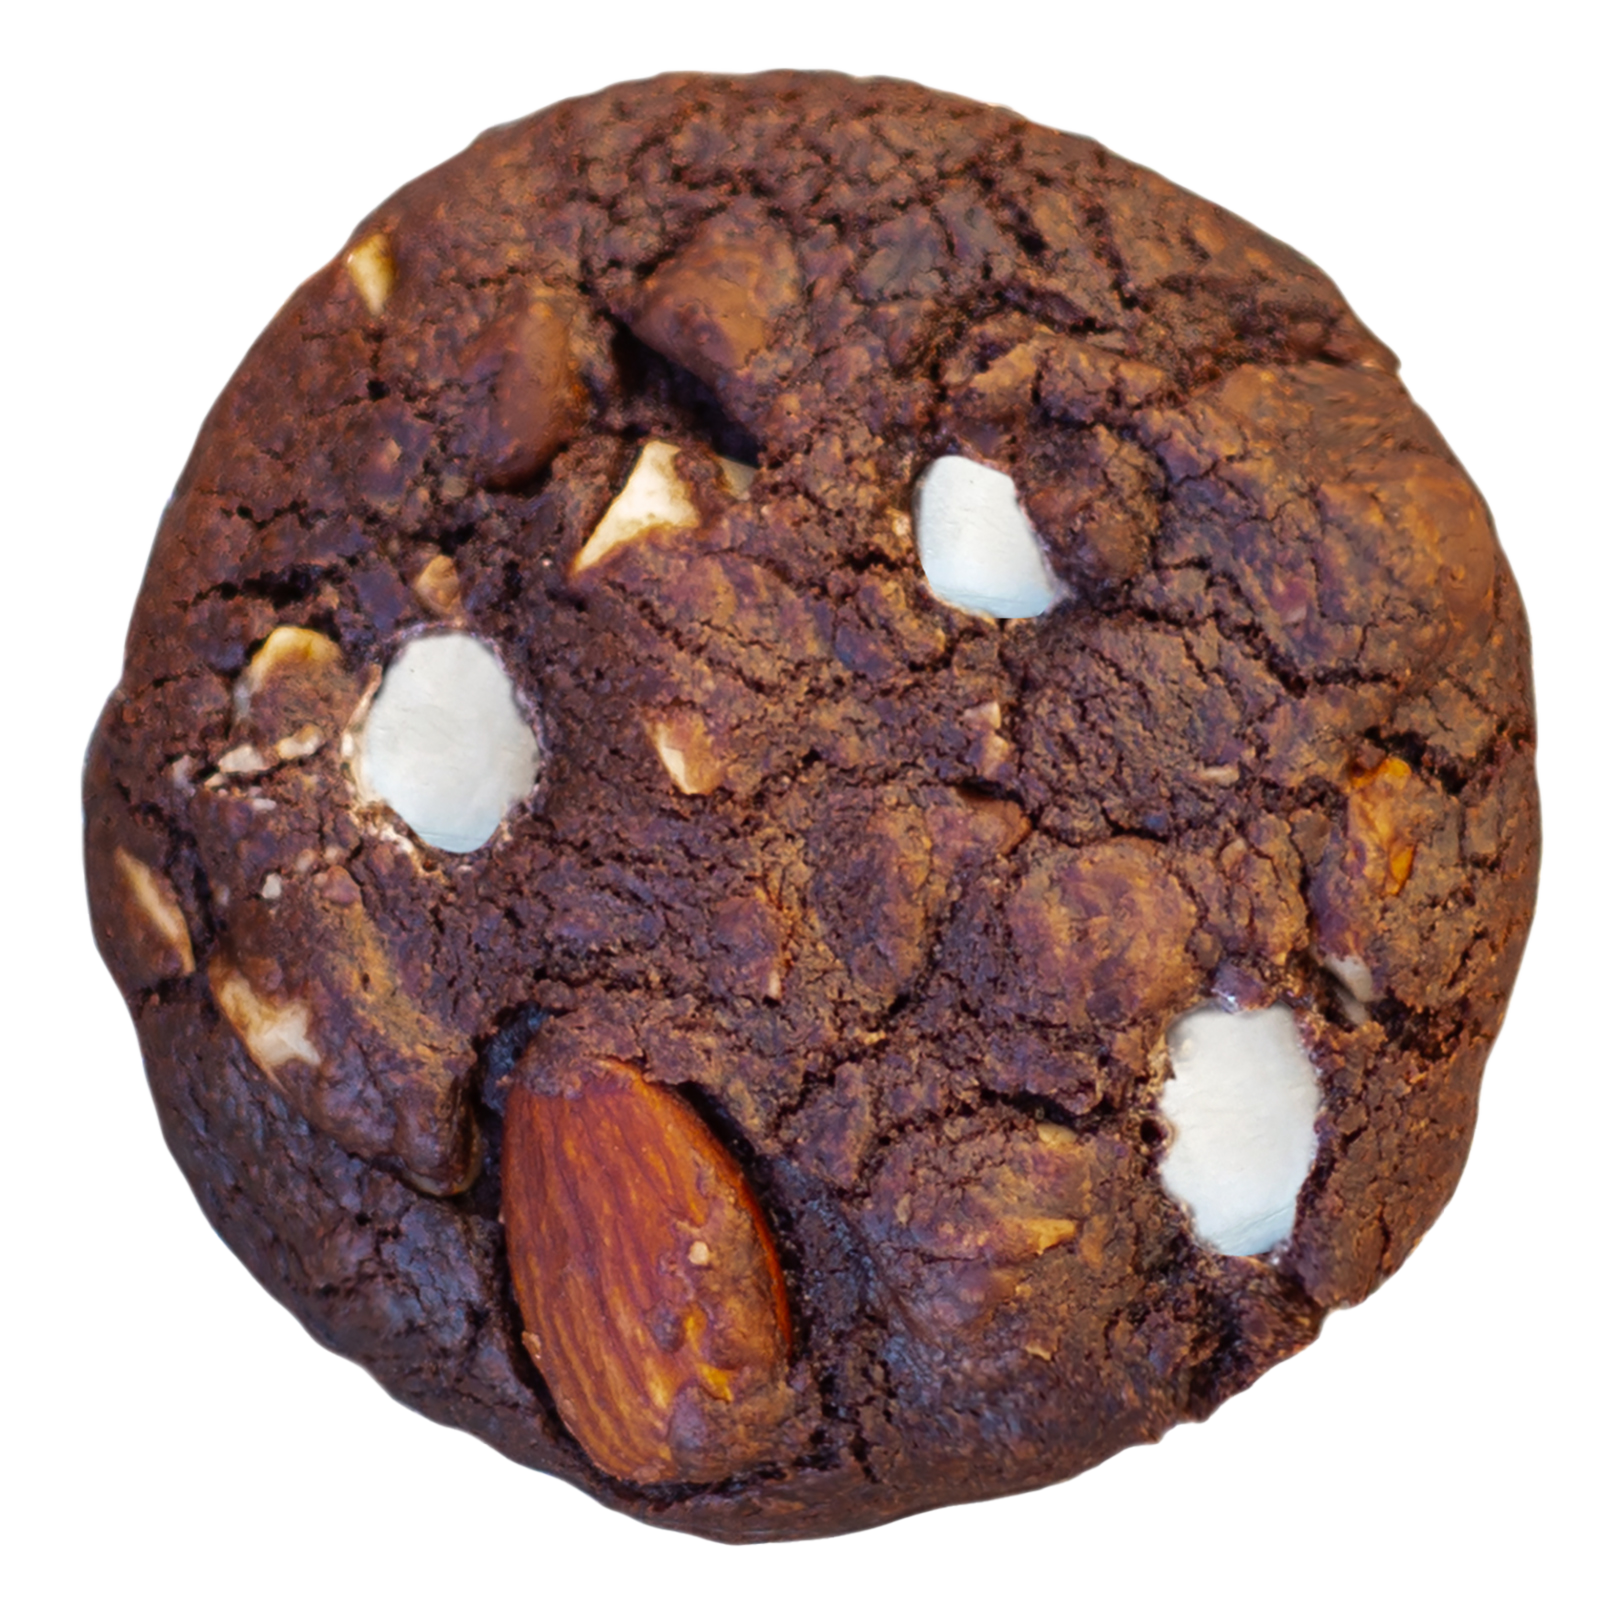 Rocky Road Cookie